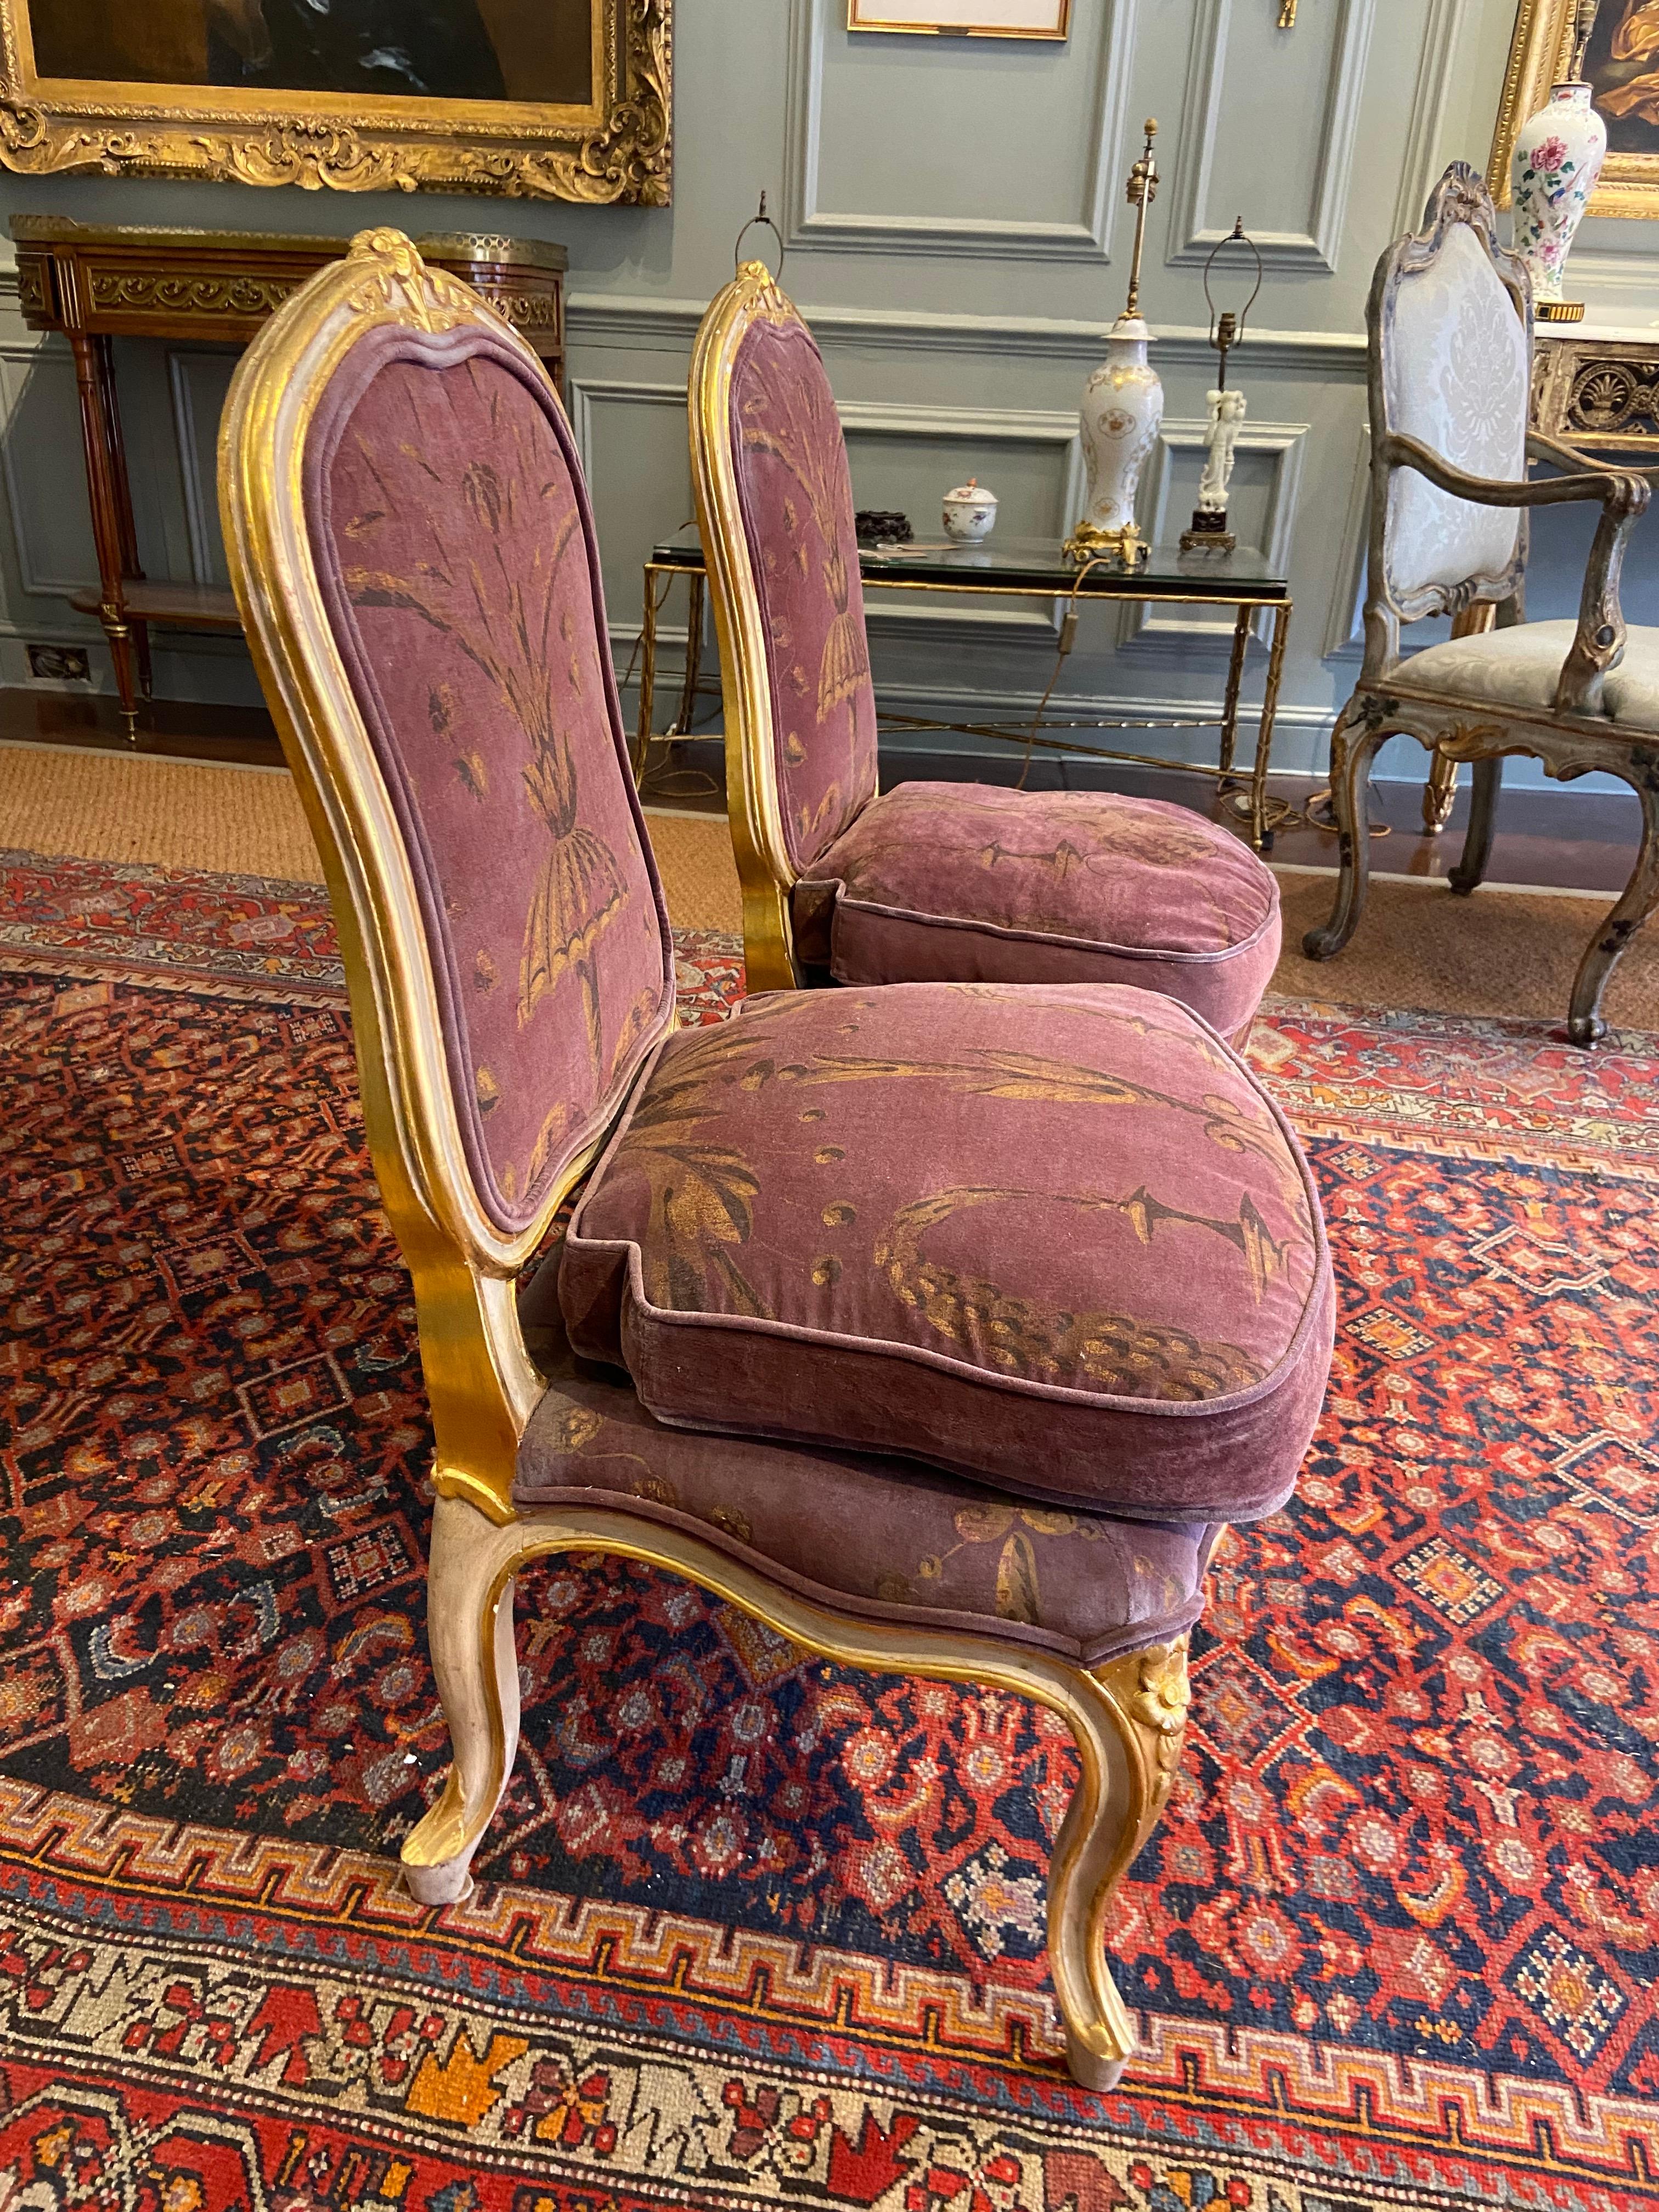 A Pair of Louis XV painted and gilded salon chairs (Mid 18th Century). Upholstered in plum-velvet and painted with floral motifs set on a gilded channelled frame with carved acanthus motifs.